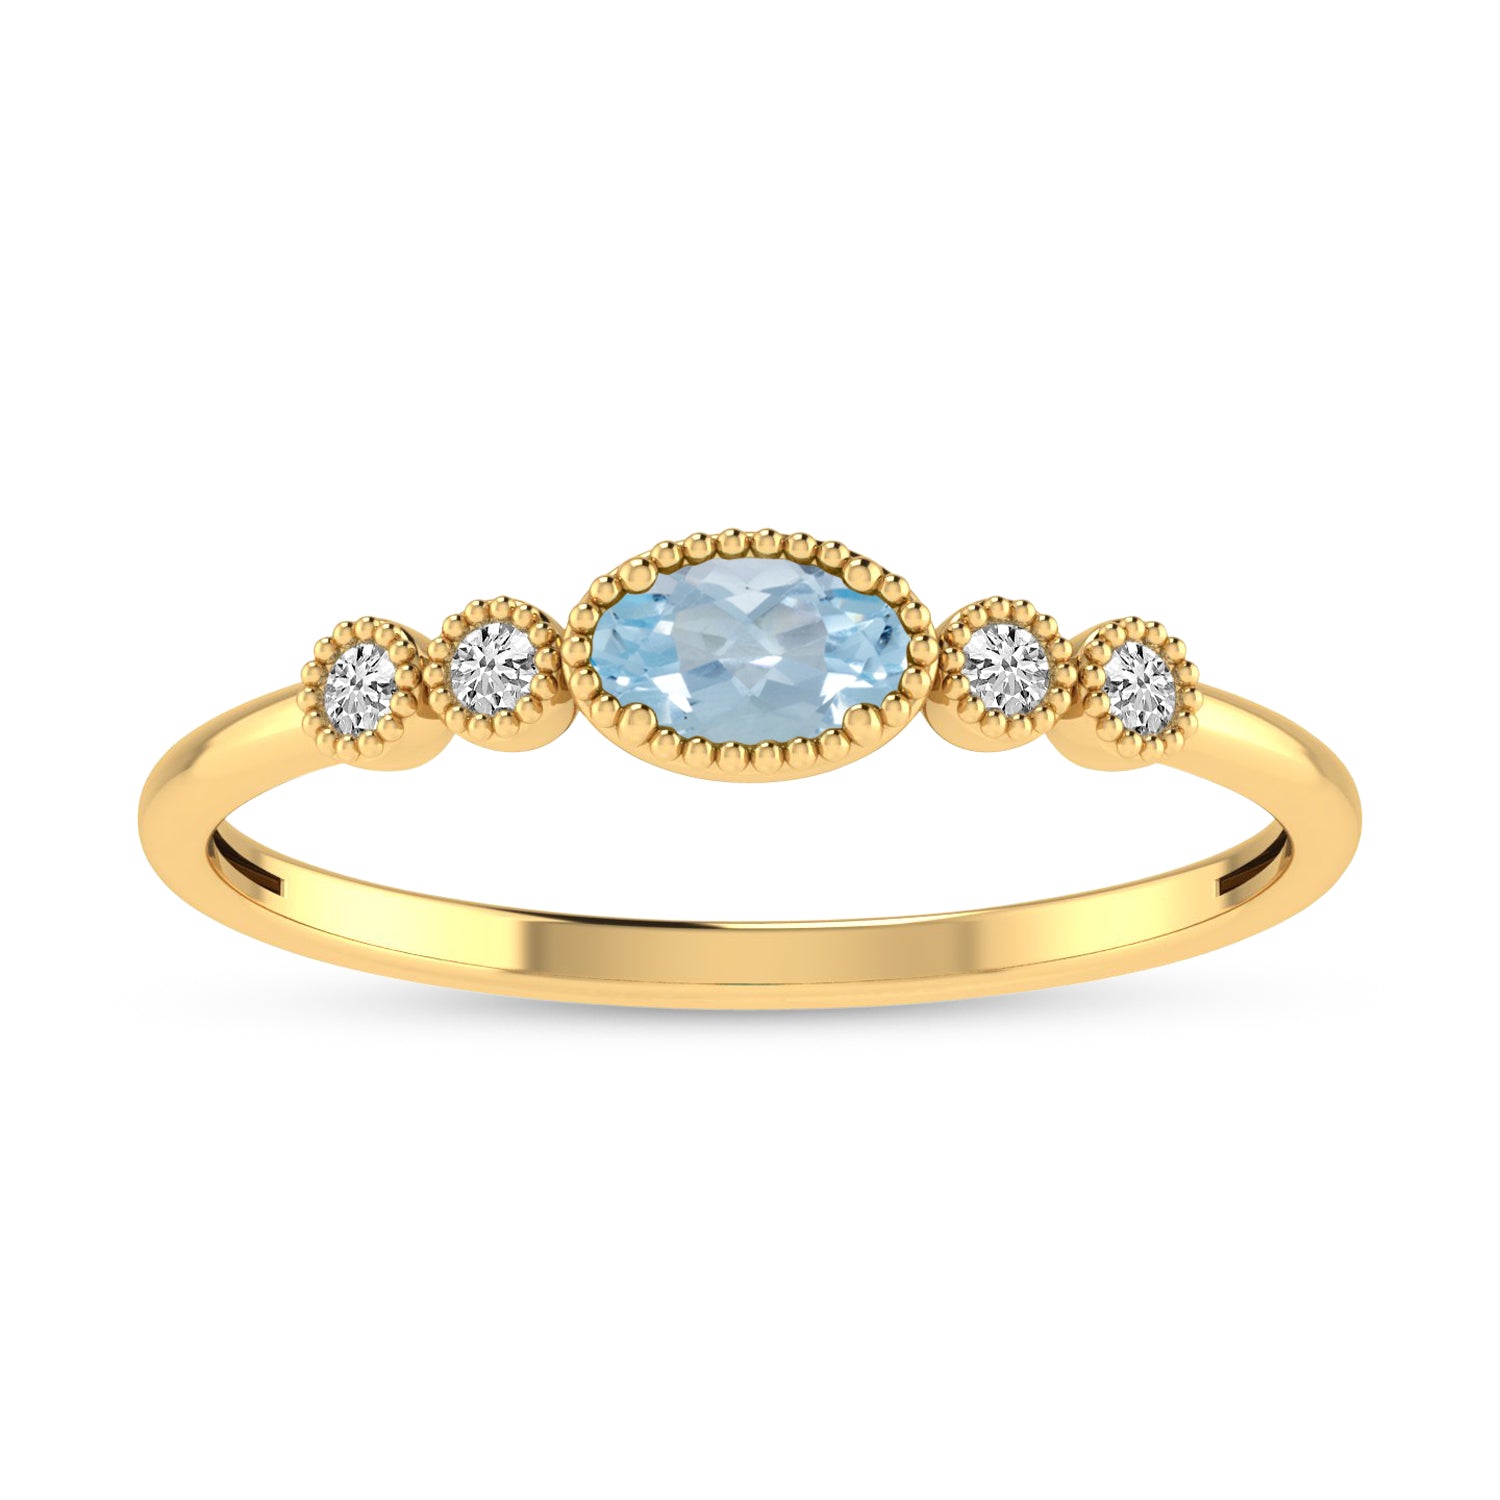 14K Yellow Gold Oval Aquamarine and Diamond Stackable Ring RM4307X-MAR